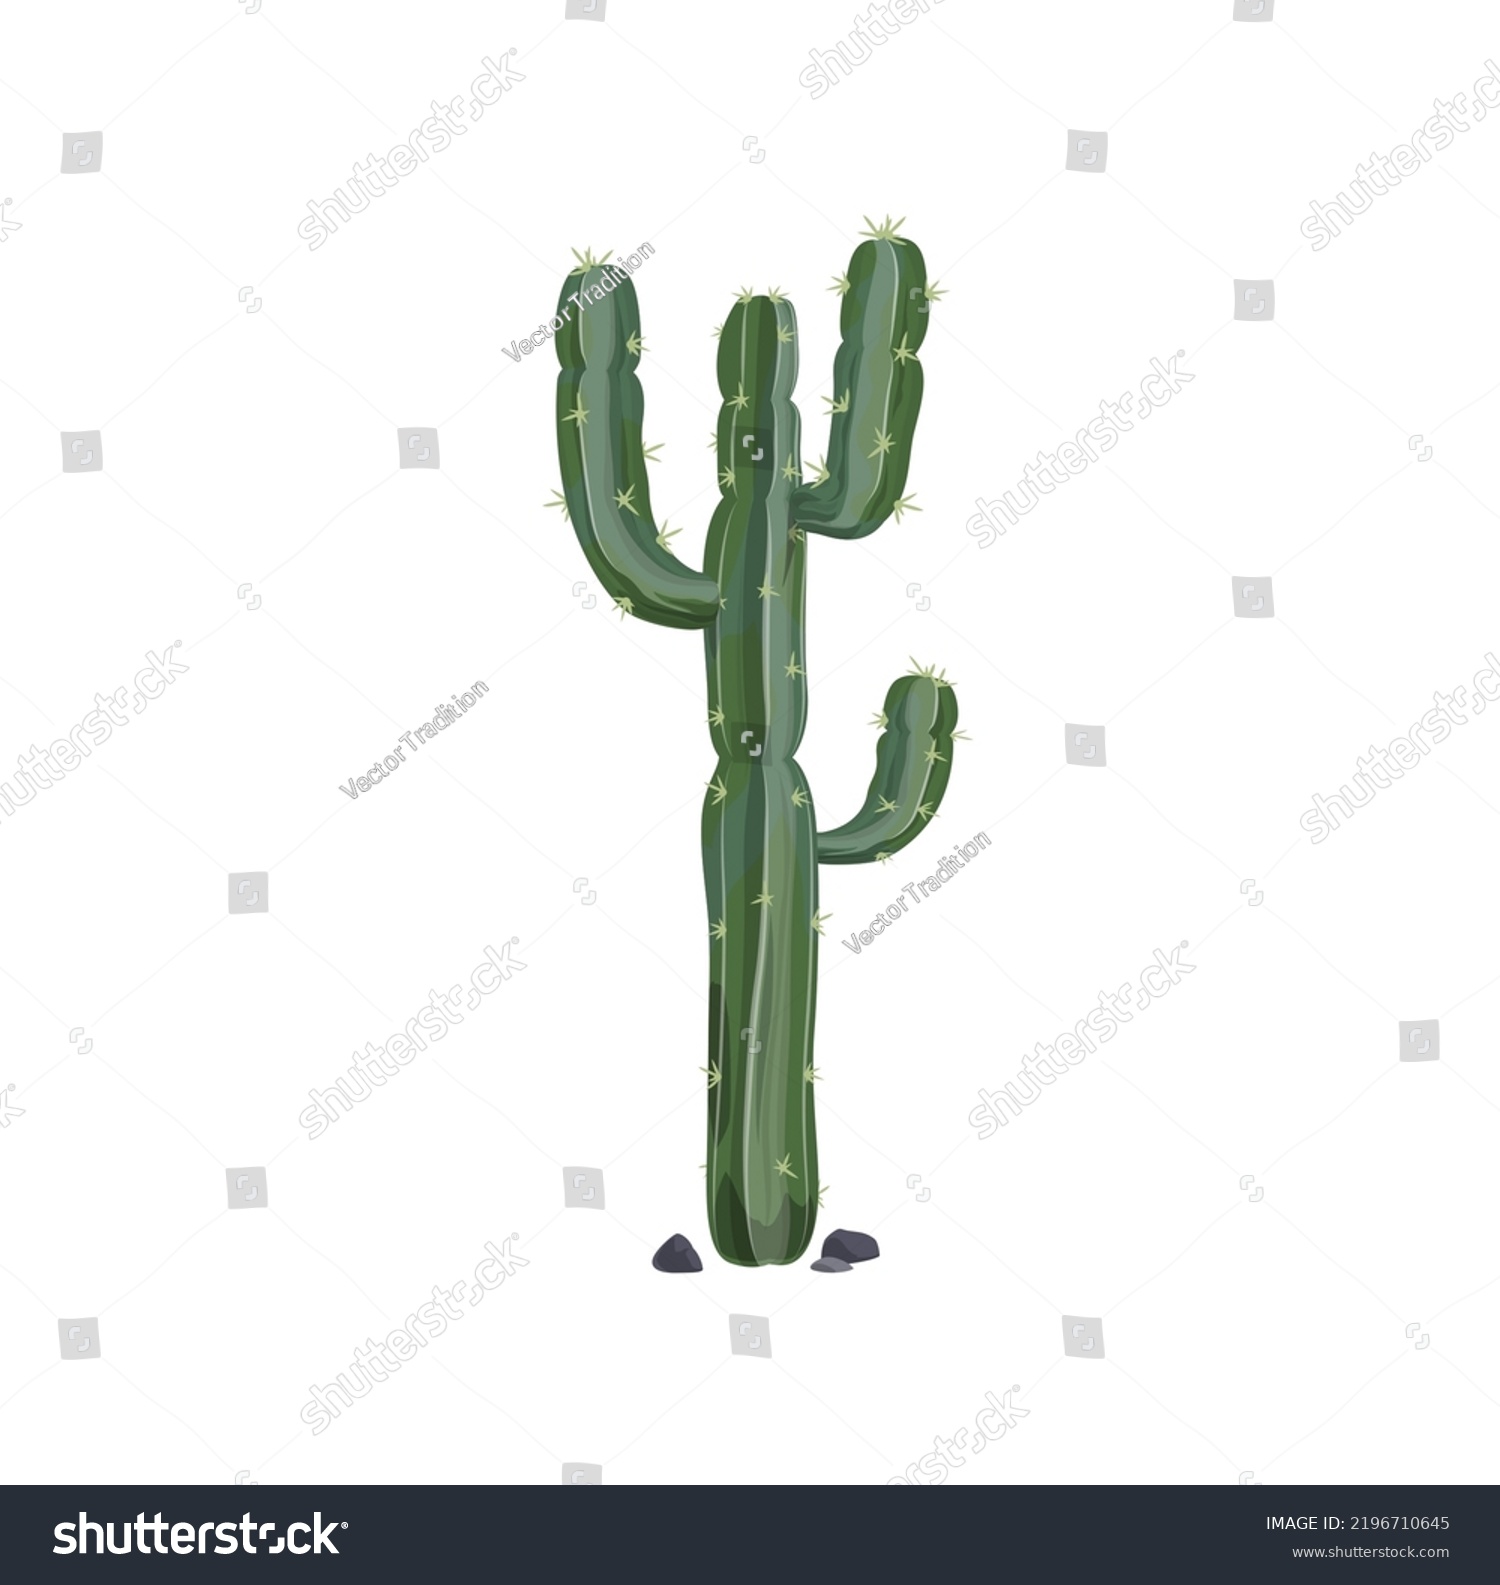 SVG of Mexican giant cardon or elephant cactus, western cactus tropical succulent grown in desert isolated. Vector indians and native americans cacti with thorns, prickly succulent plant tall spiky tree svg